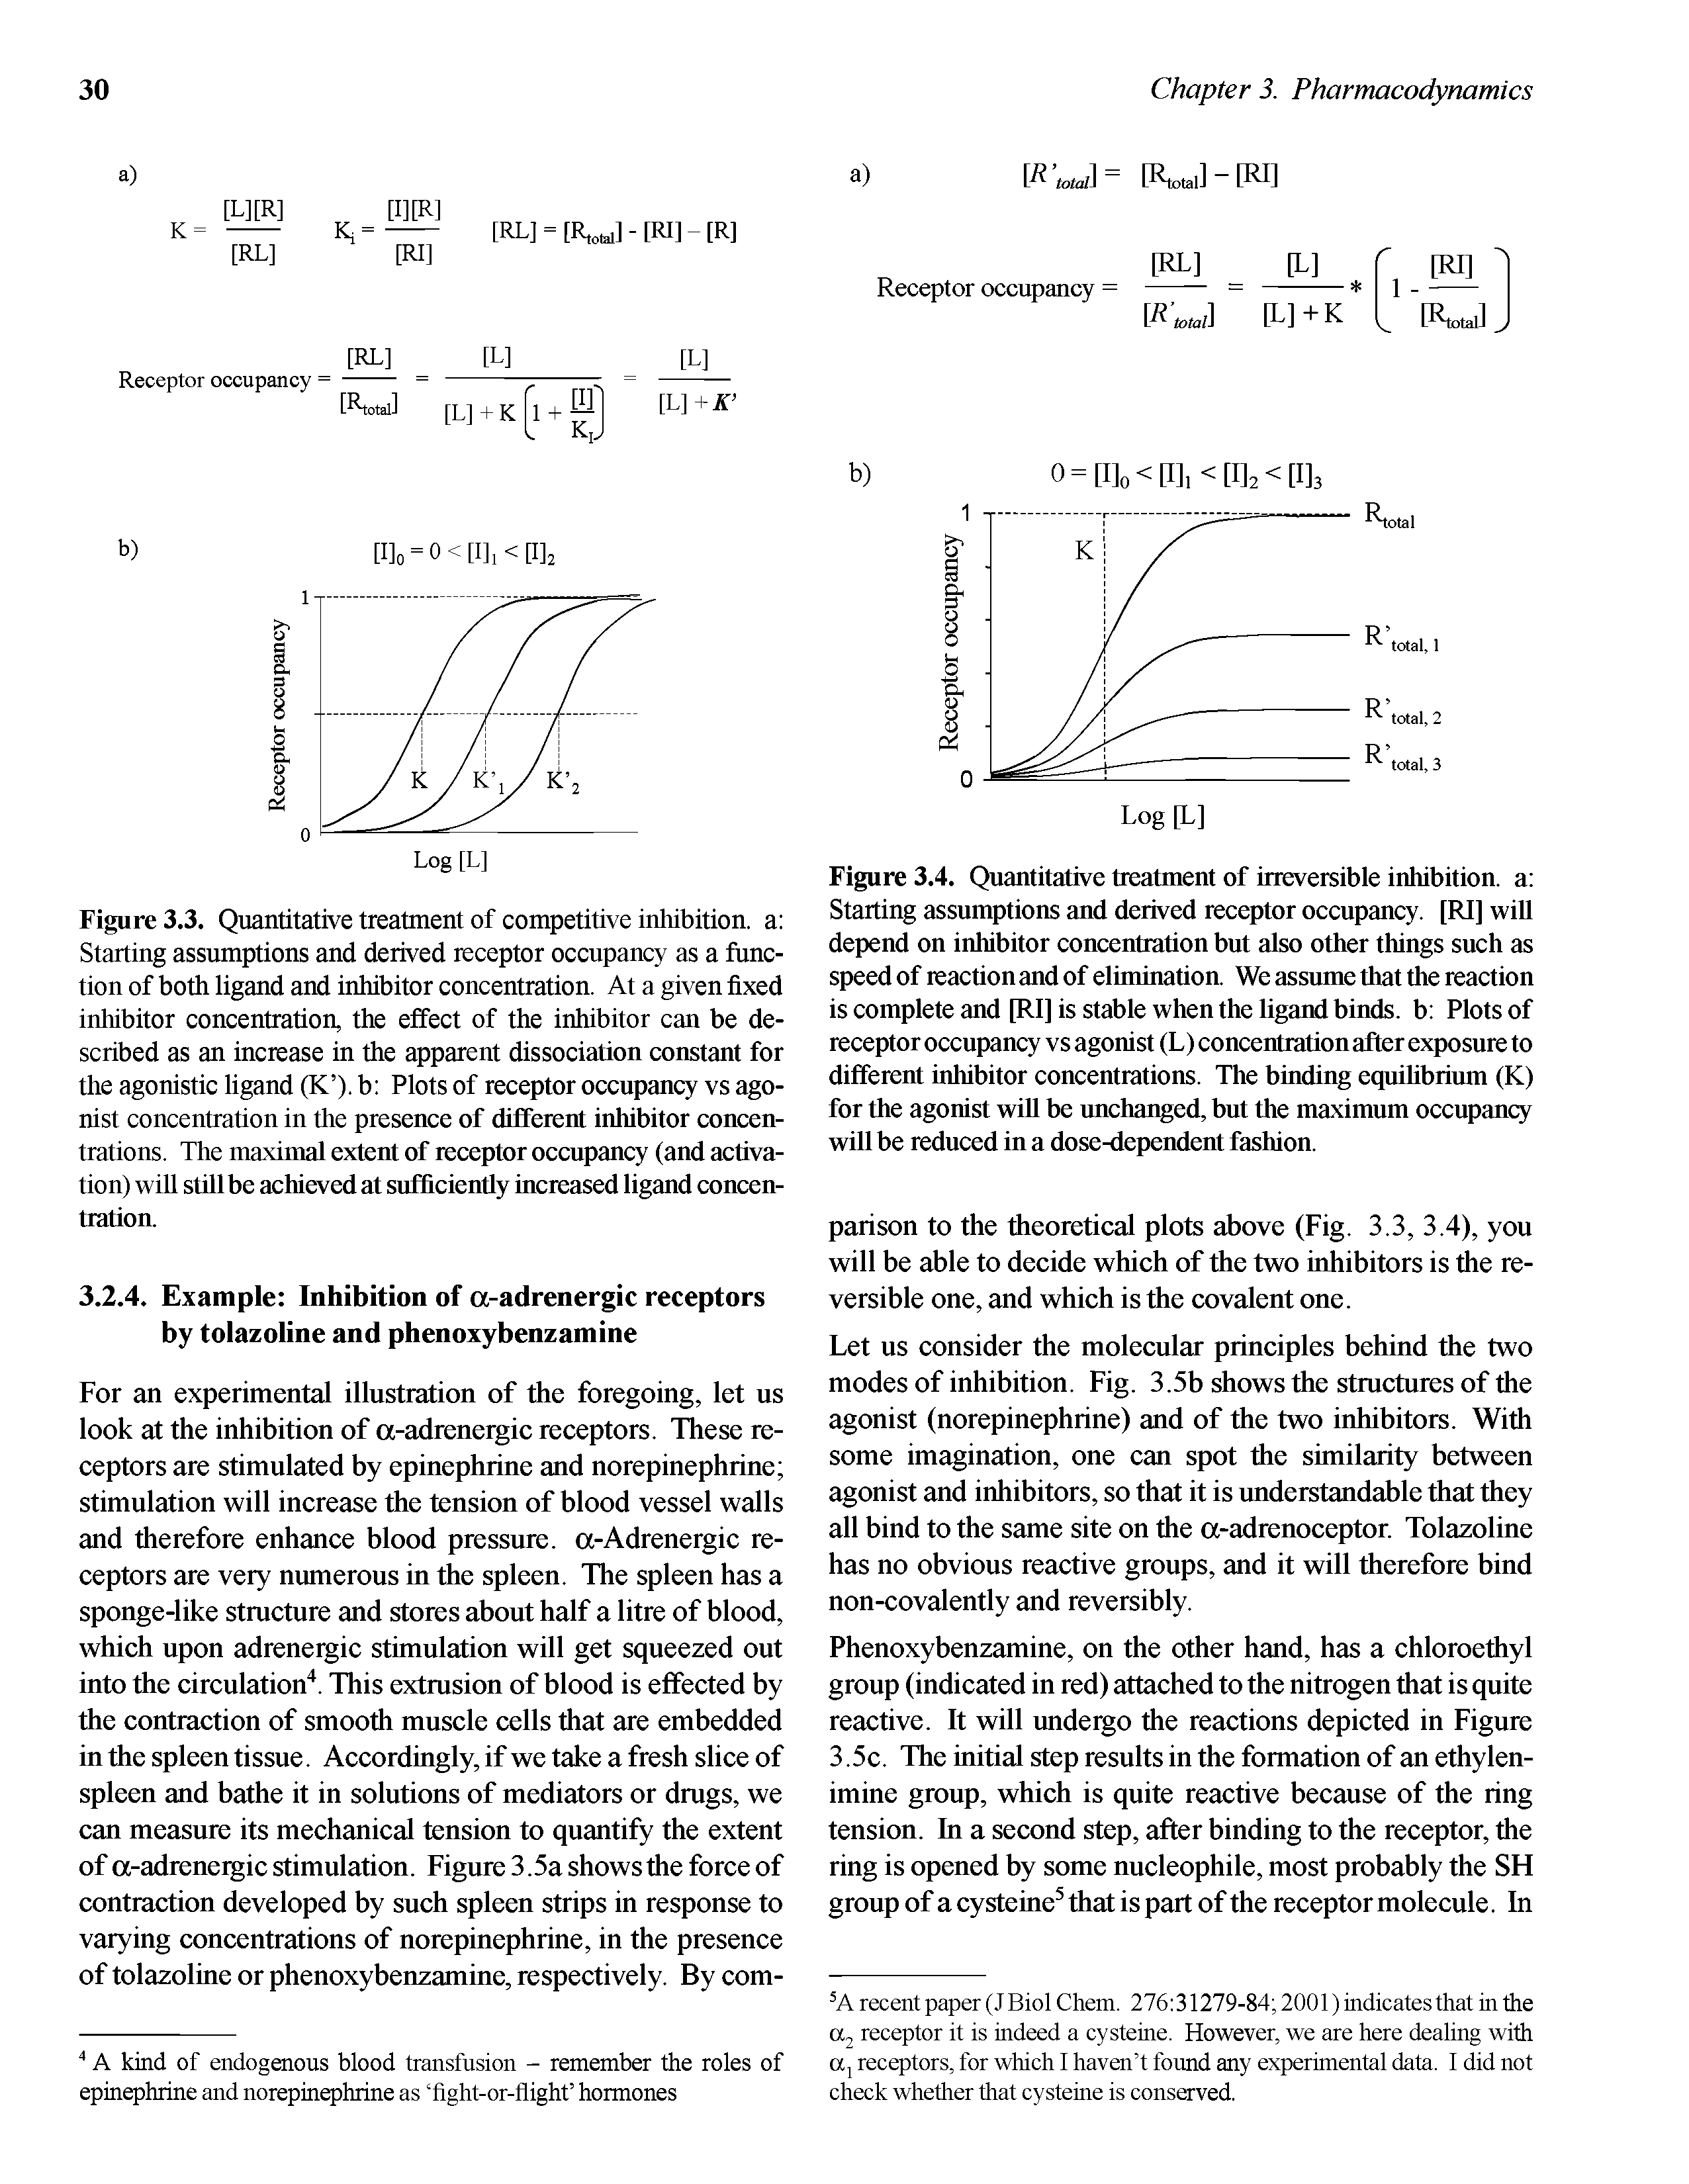 Figure 3.4. Quantitative treatment of irreversible inhibition, a Starting assumptions and derived receptor occupancy. [RI] will depend on inhibitor concentration but also other things such as speed of reaction and of elimination. We assume that the reaction is complete and [RI] is stable when the ligand binds, b Plots of receptor occupancy vs agonist (L) concentration after exposure to different inhibitor concentrations. The binding equihbrium (K) for the agonist will be unchanged, bnt the maximum occupancy will be reduced in a dose-dependent fashion.